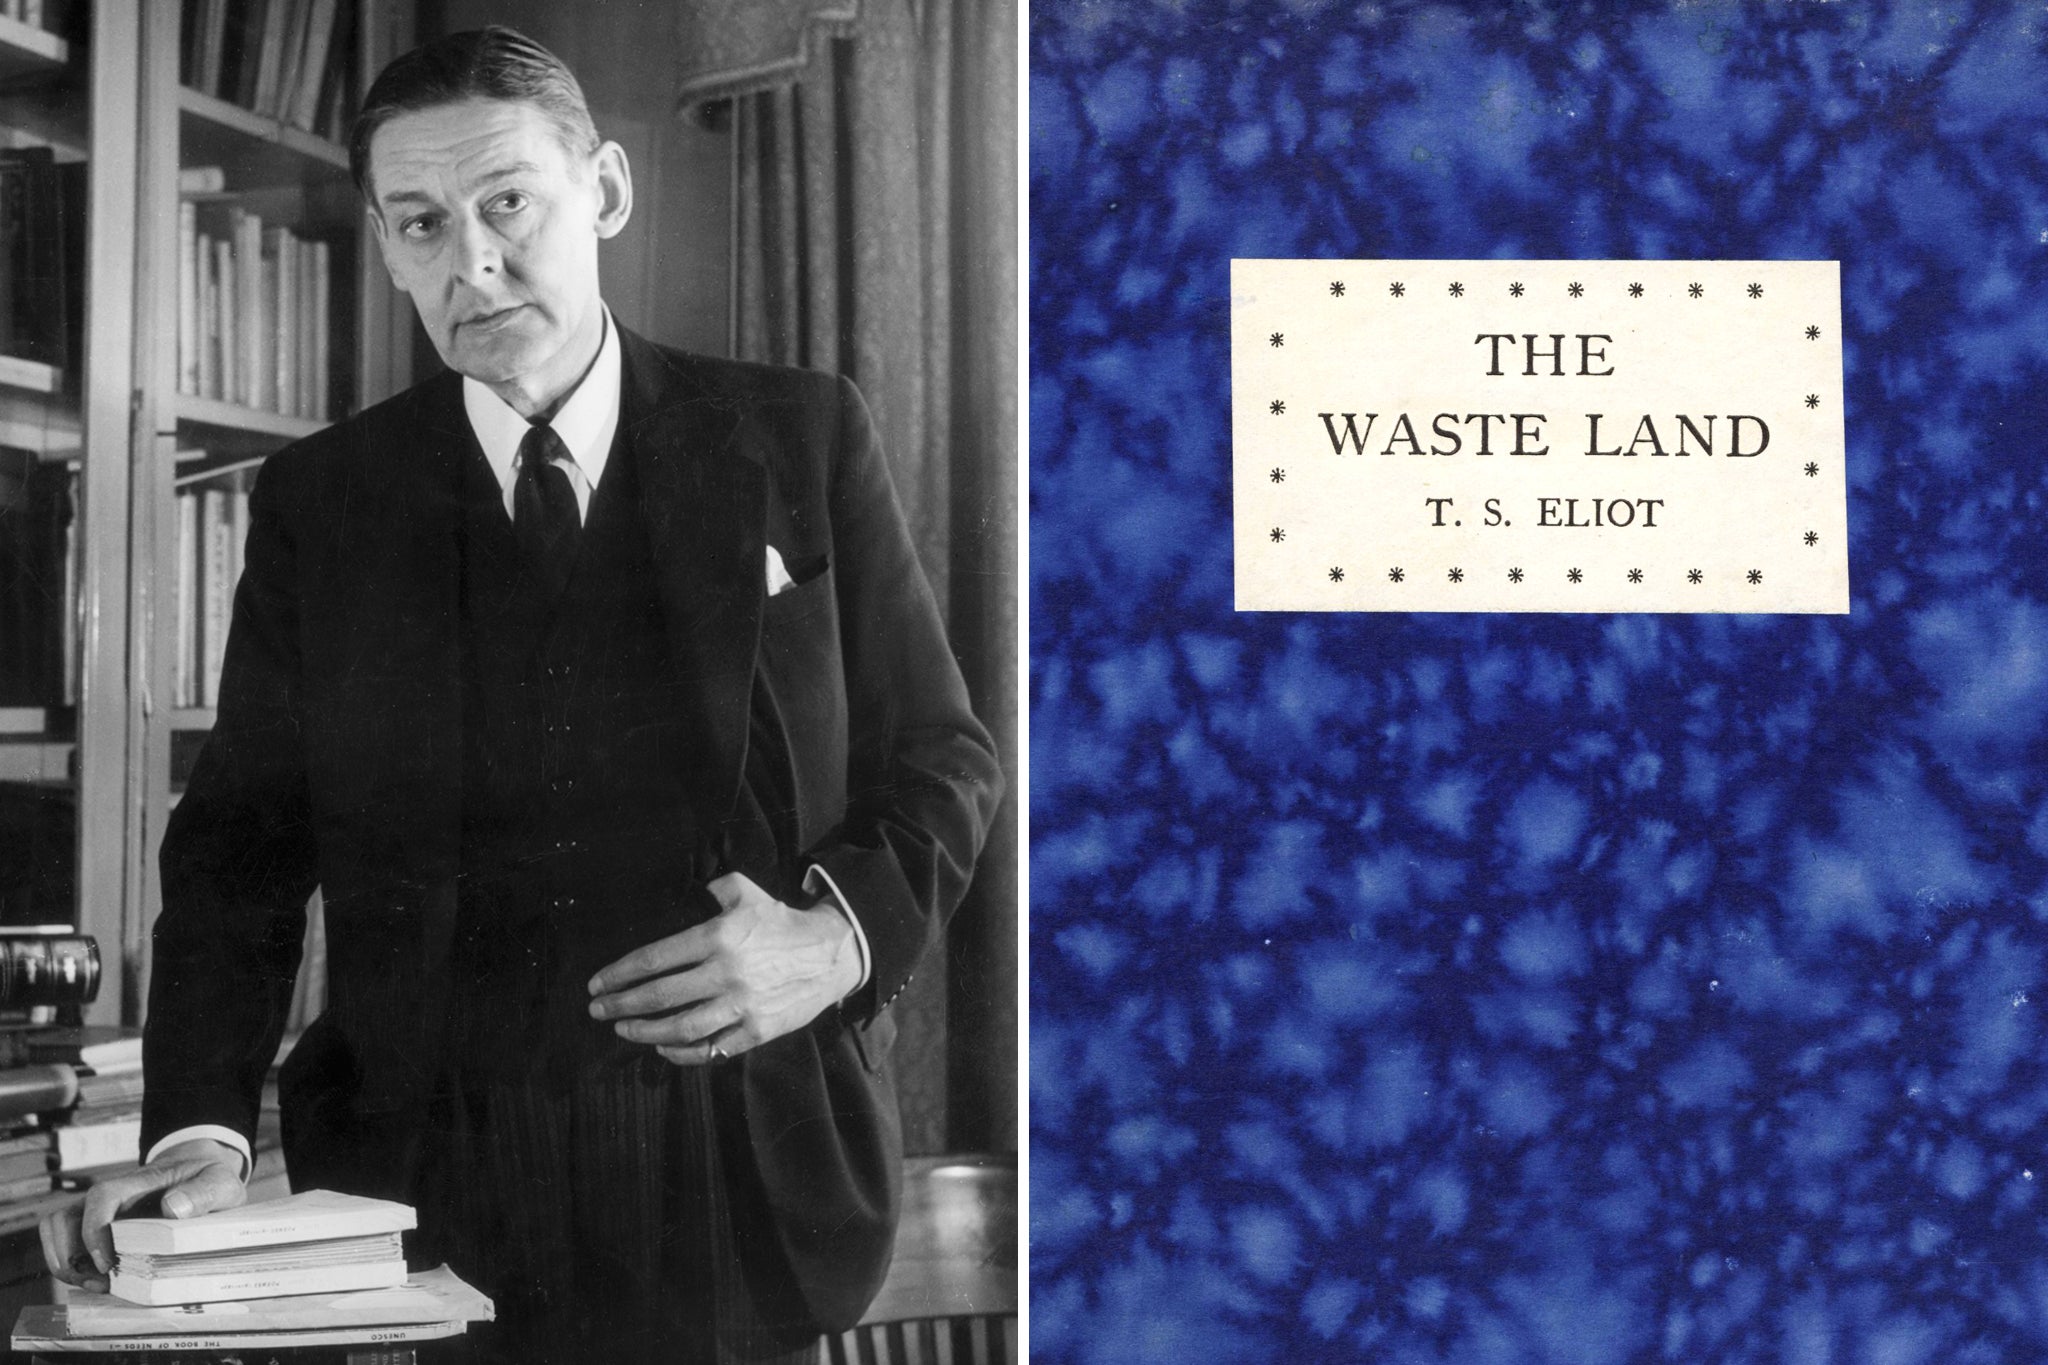 TS Eliot published his modernist goliath of a poem ‘The Waste Land’ in December 1922